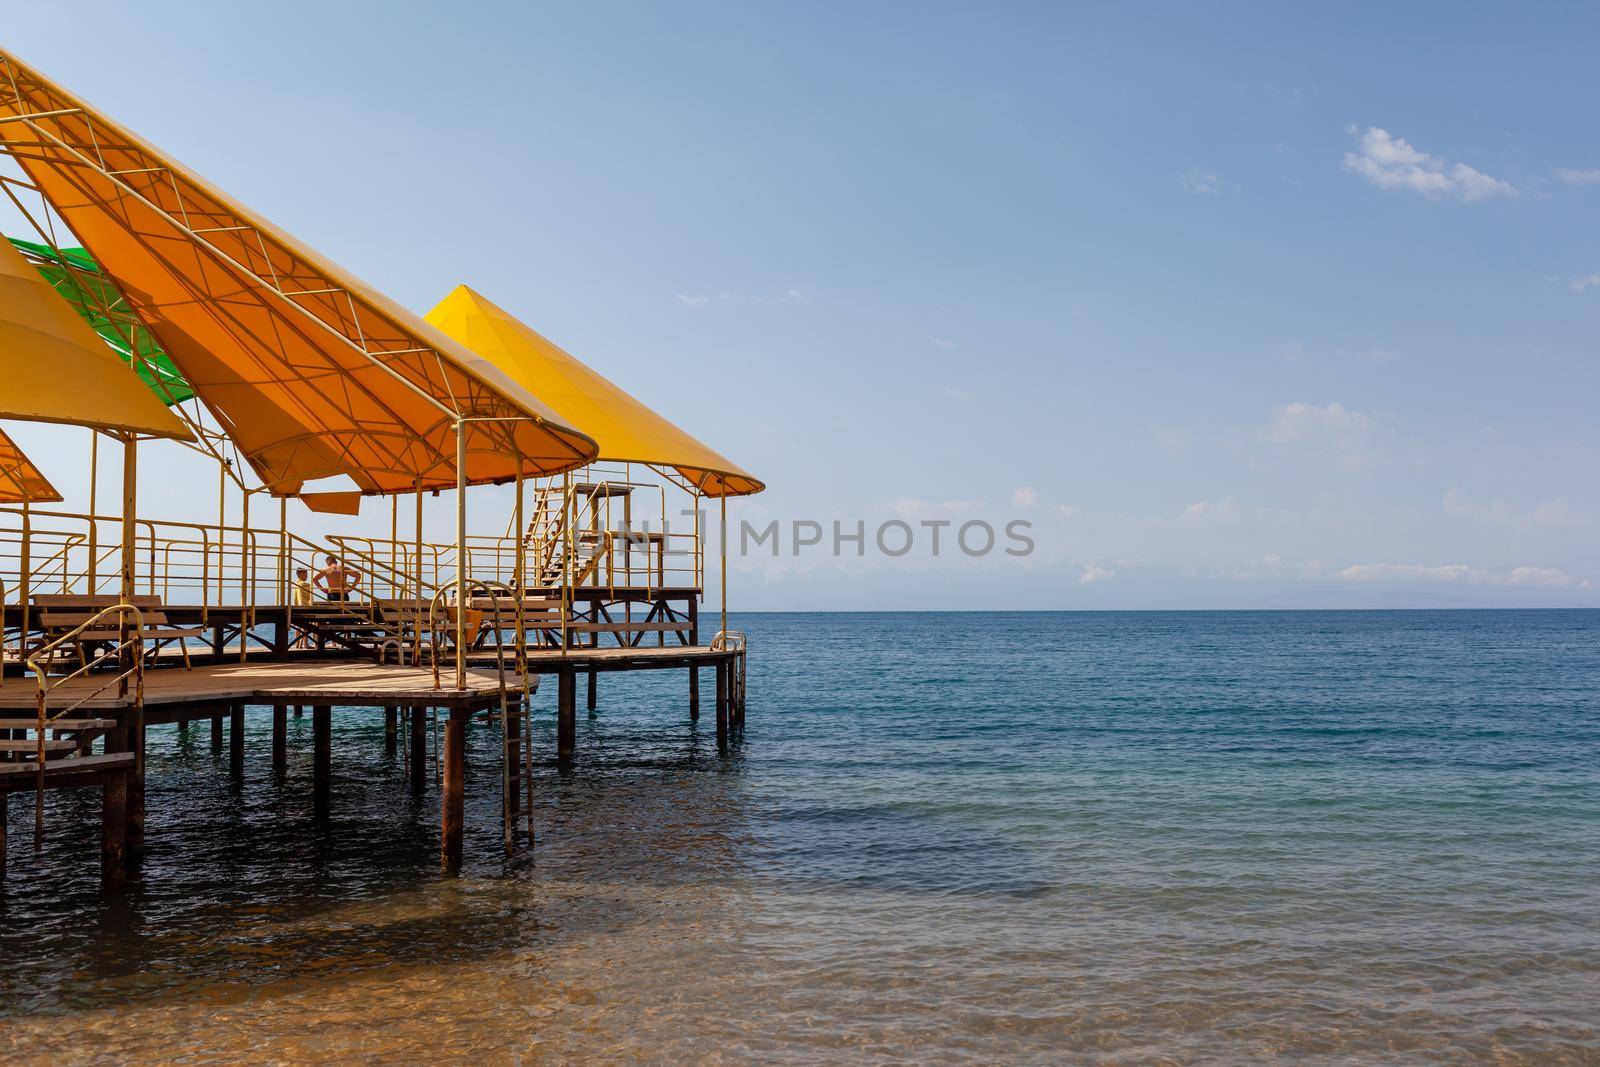 Swimming area or pier on the sea. A large pier with a roof, wooden planks and rusty stairs descending into the water. Bathing and resting place.